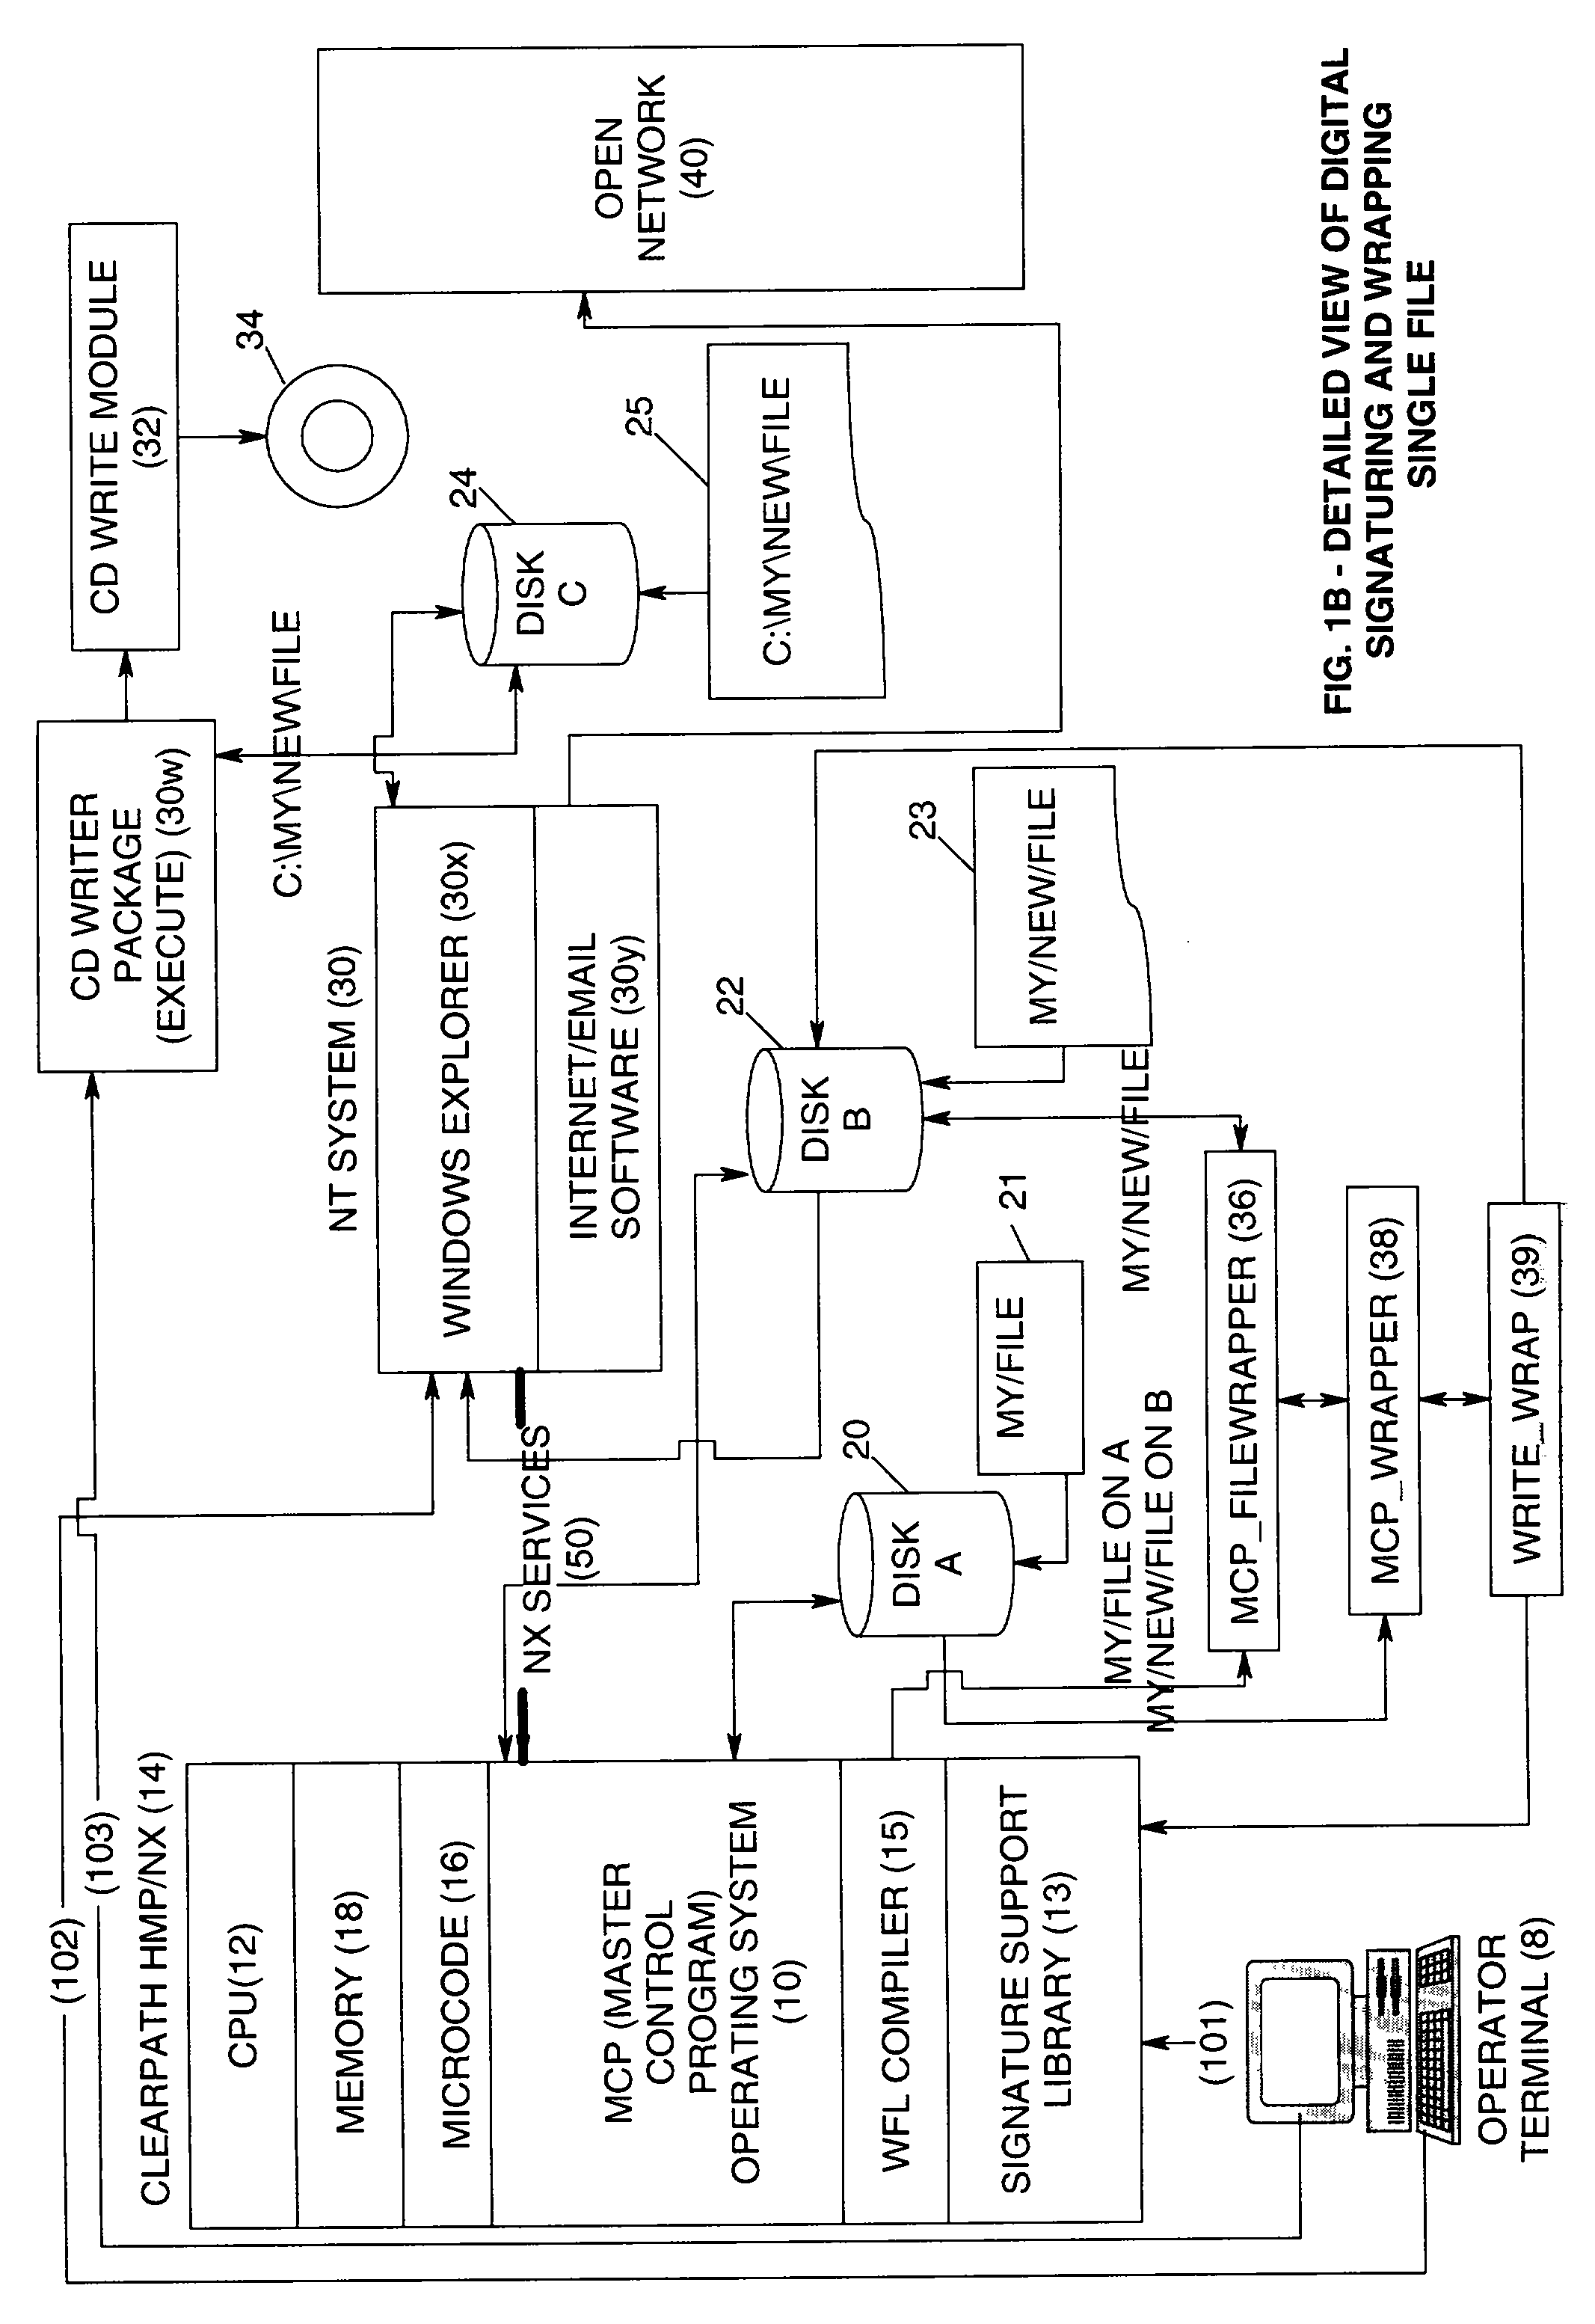 Digital signaturing method and system for packaging specialized native files for open network transport and for burning onto cd-rom